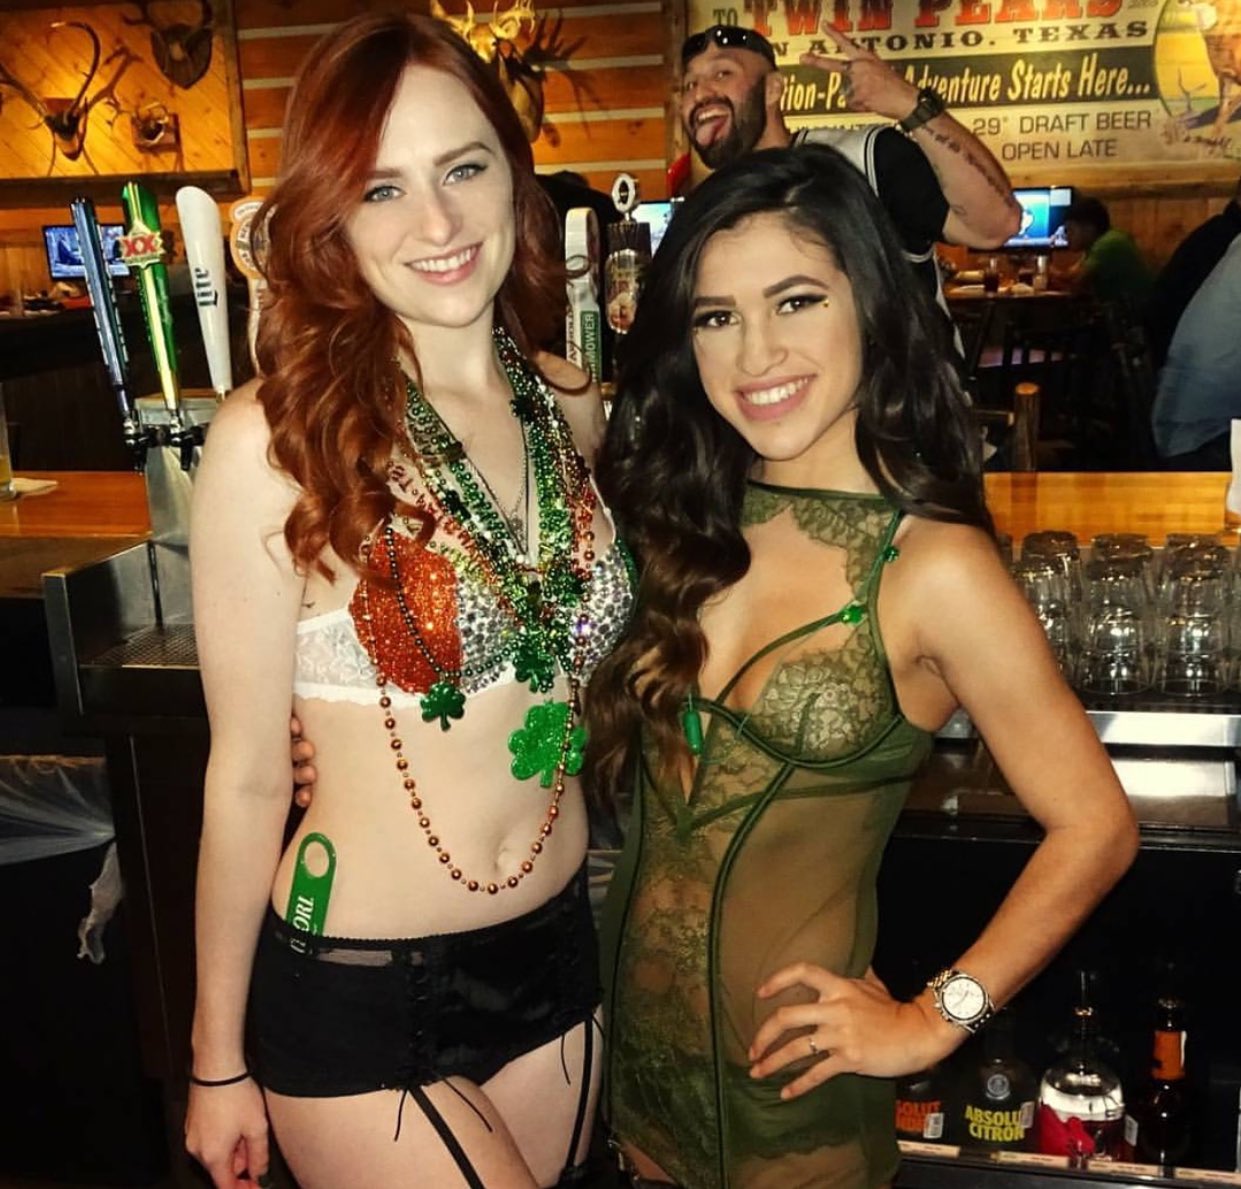 Twin Peaks Westover on X: 💚💚Throwback to St. Patrick's Day!💚💚  #stpattysday #green #lingerie #twinpeaks #twinpeakswestover #bartenders  #texasgirls #throwbackthursday  / X